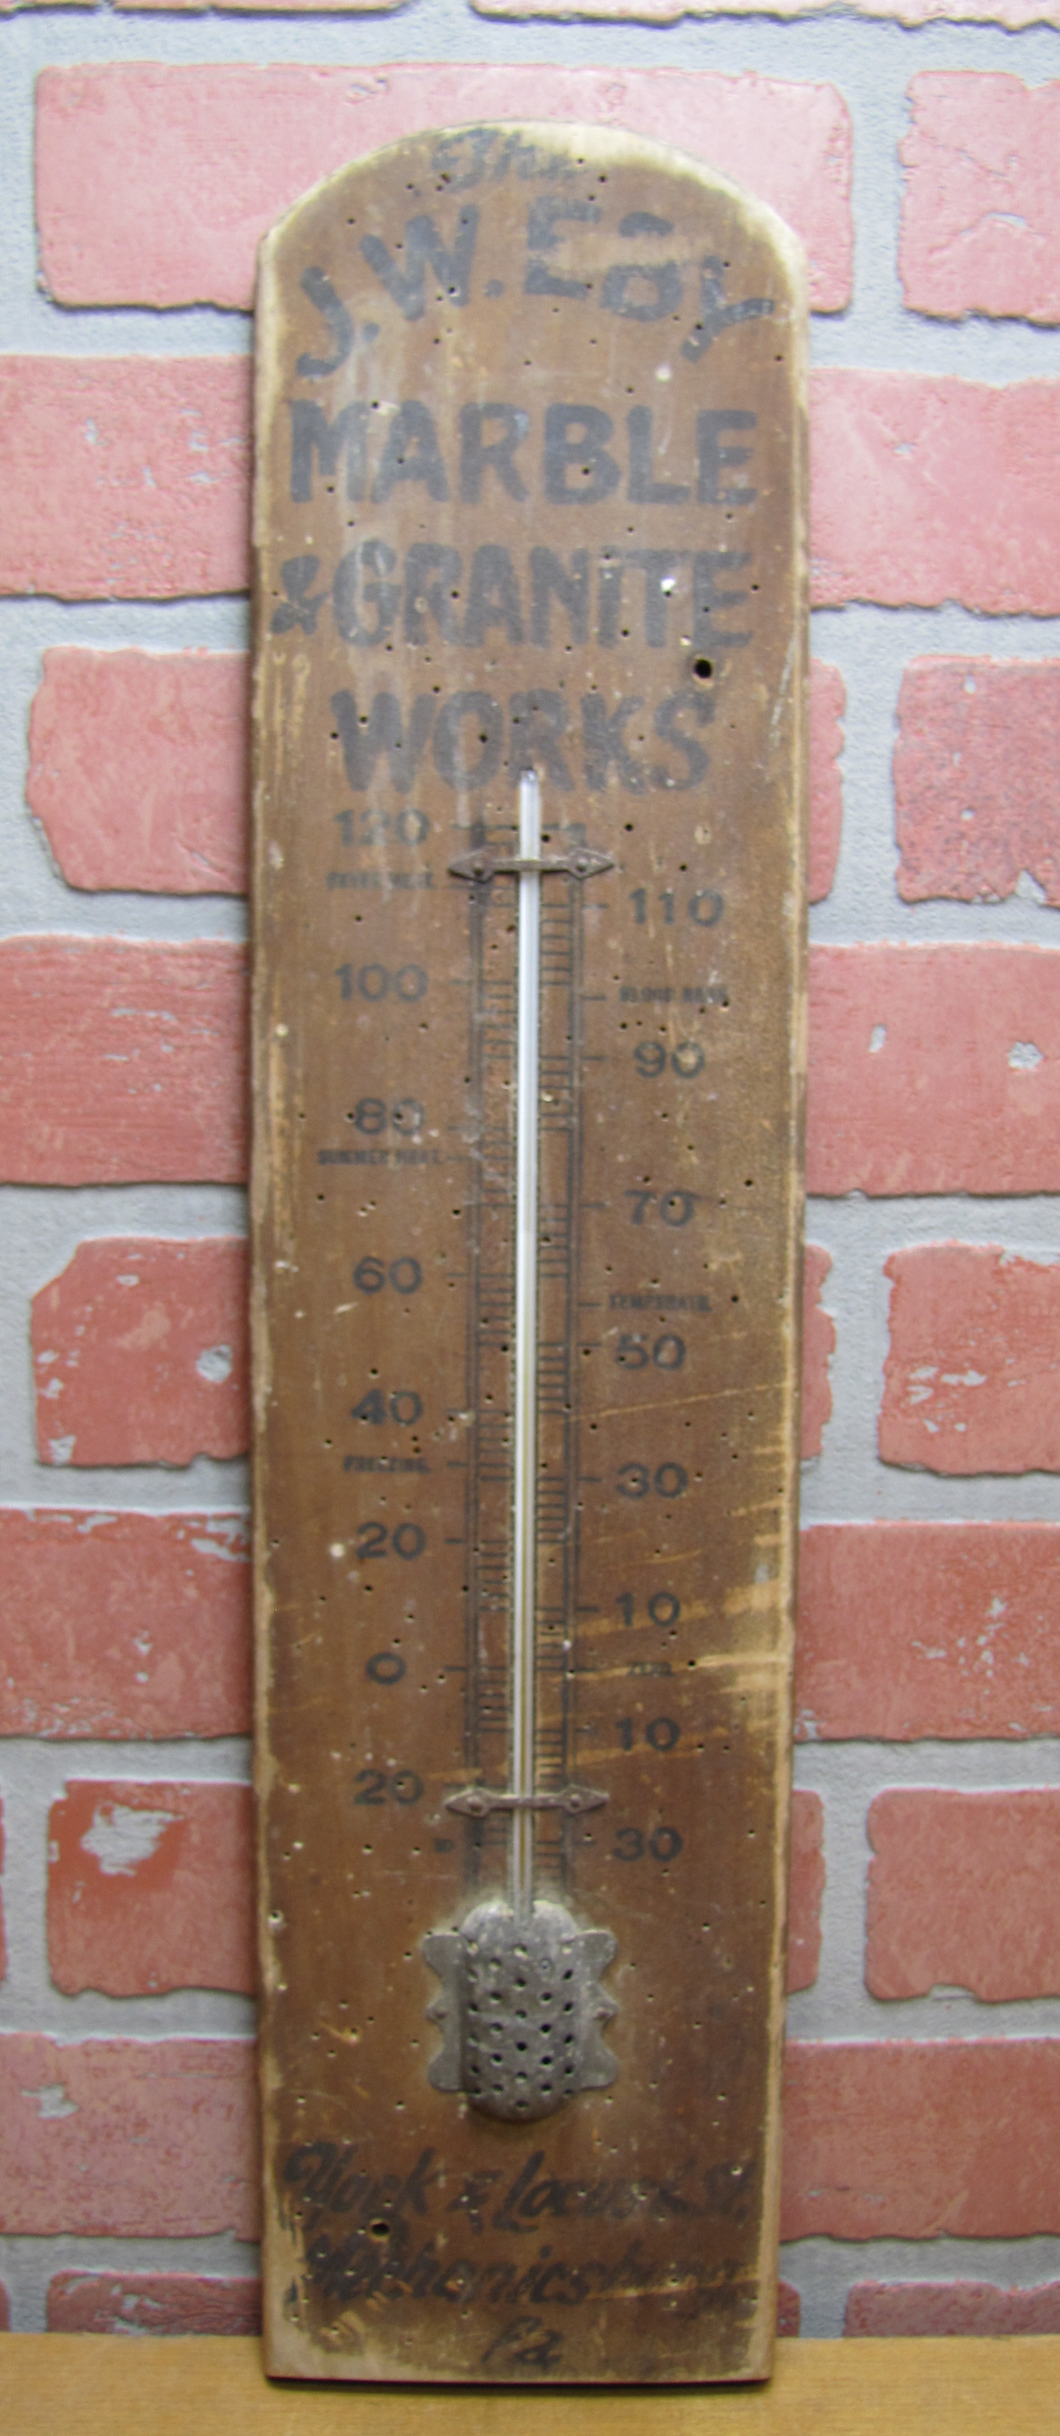 J W EBY MARBLE & GRANITE WORKS MECHANICSBURG Pa Antique Ad Thermometer Cemetary Funeral Headstone Memorial Monument Co